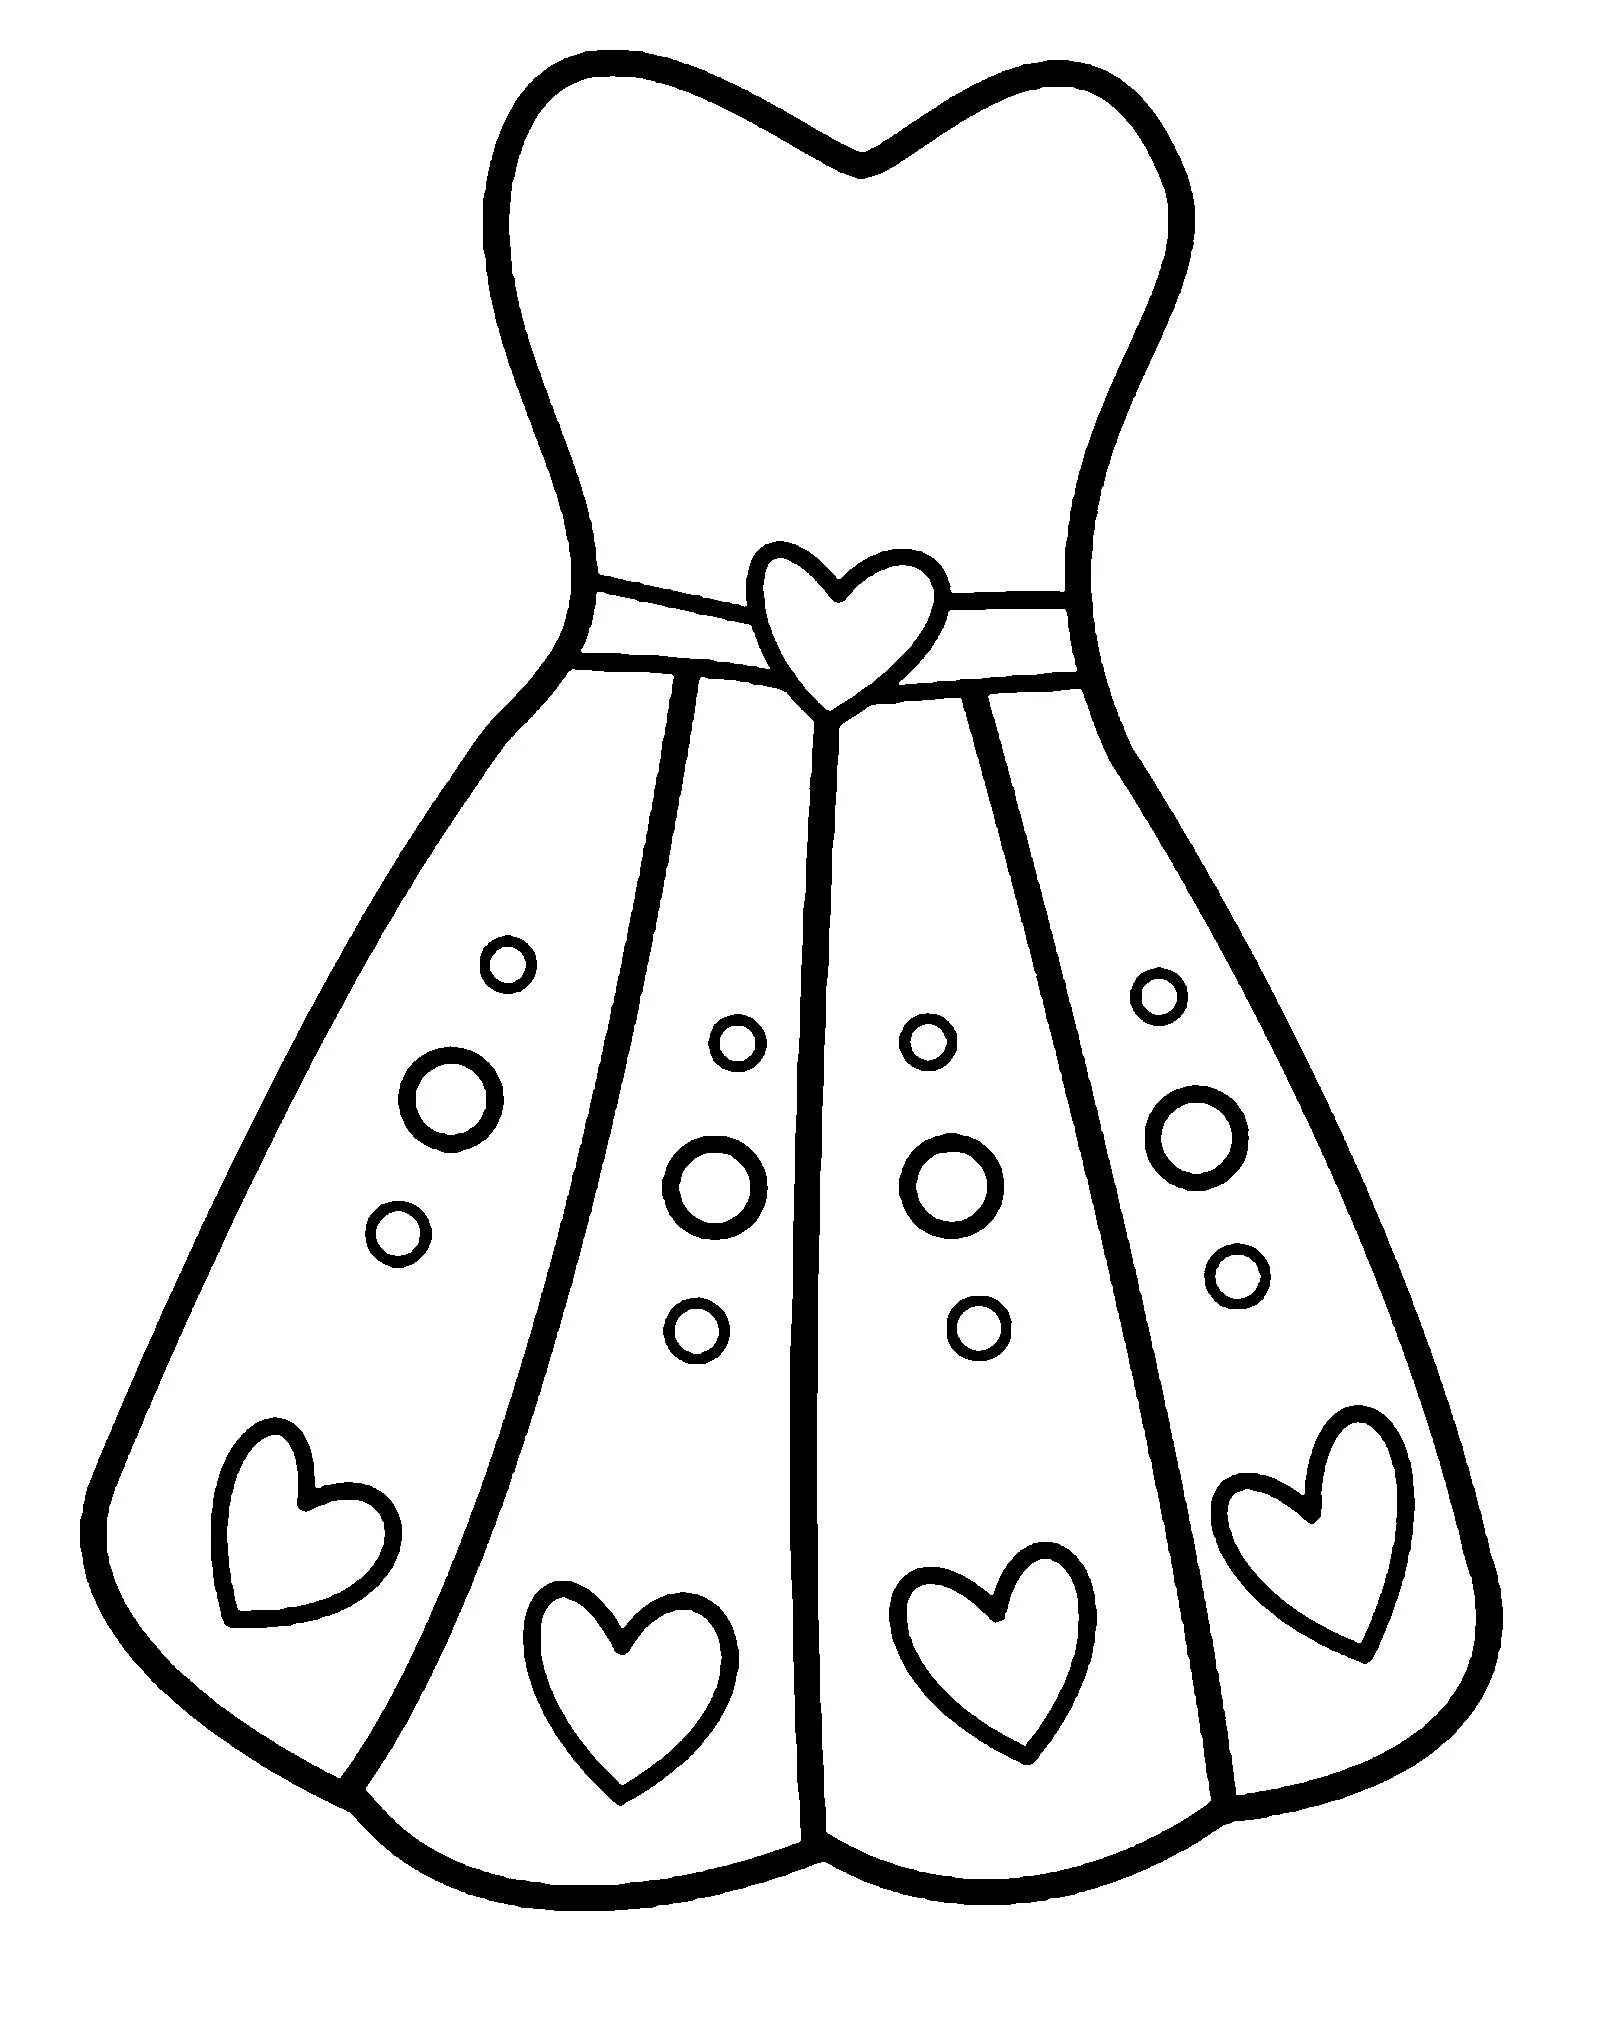 Coloring page exotic dress for children 2-3 years old